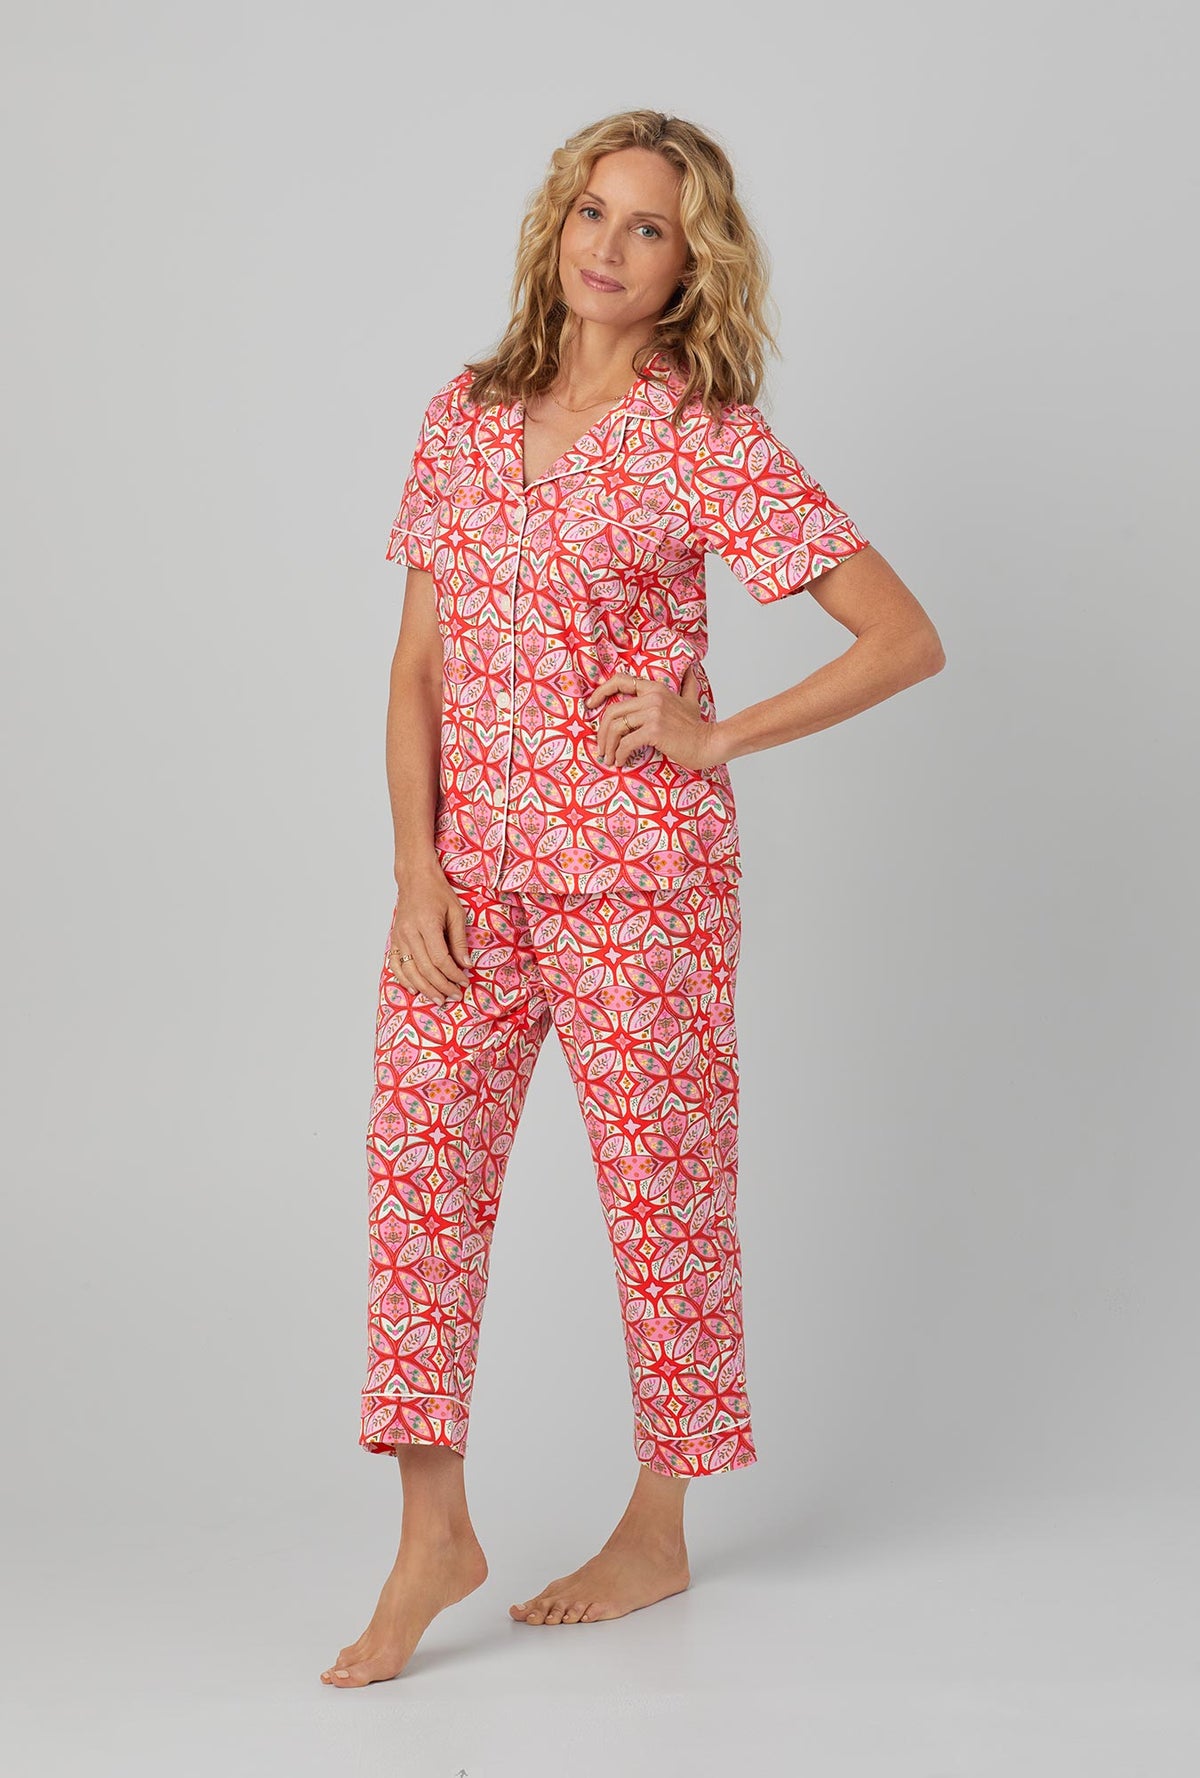 A lady wearing red Short Sleeve Classic Stretch Jersey Cropped PJ Set with Prairie Dawn print